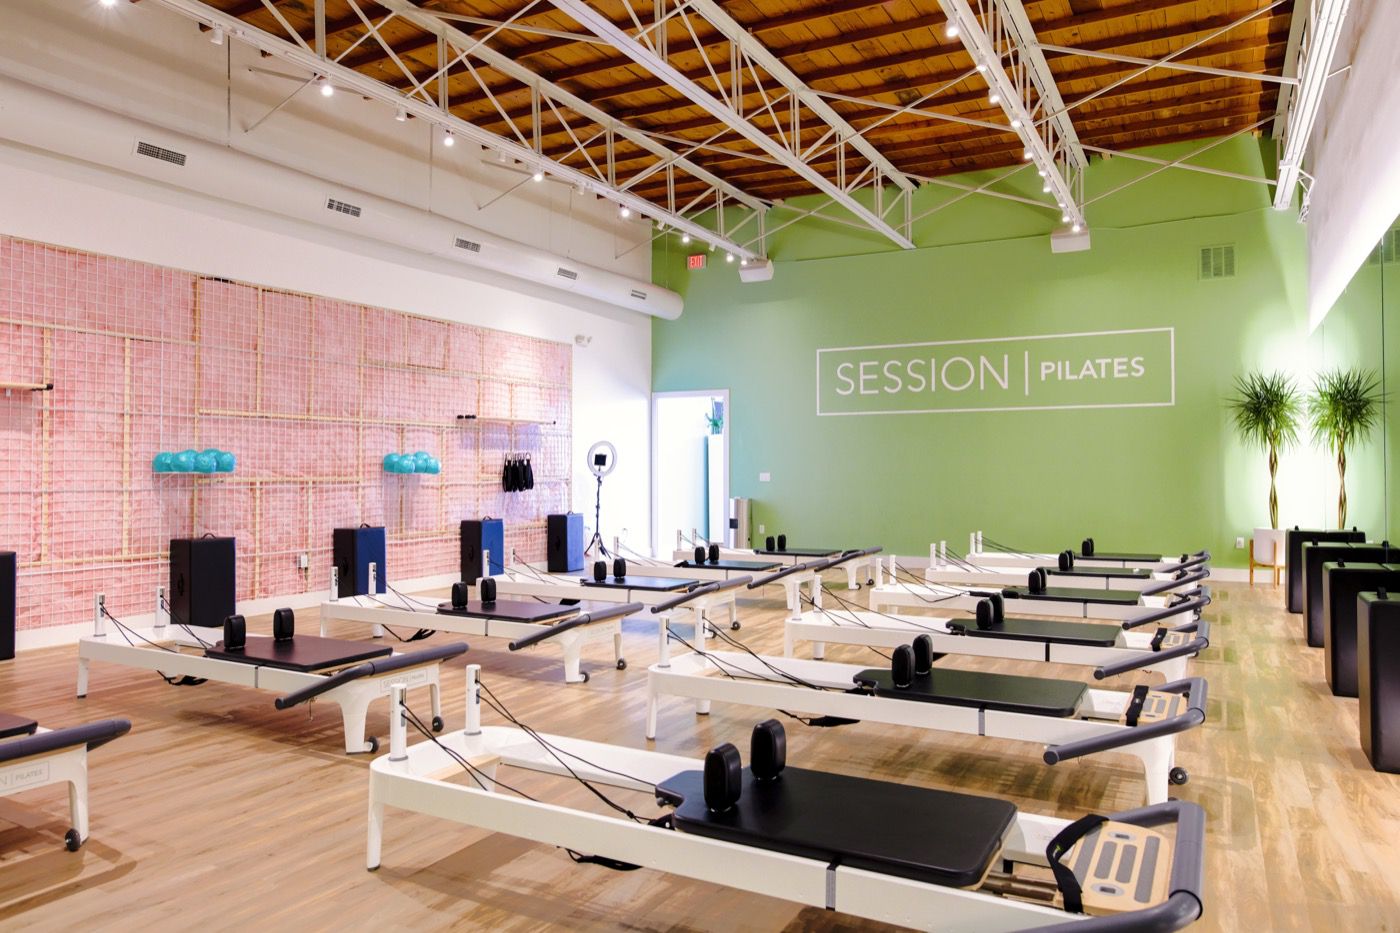 Popular pilates gym expands to the Park Cities area of Dallas